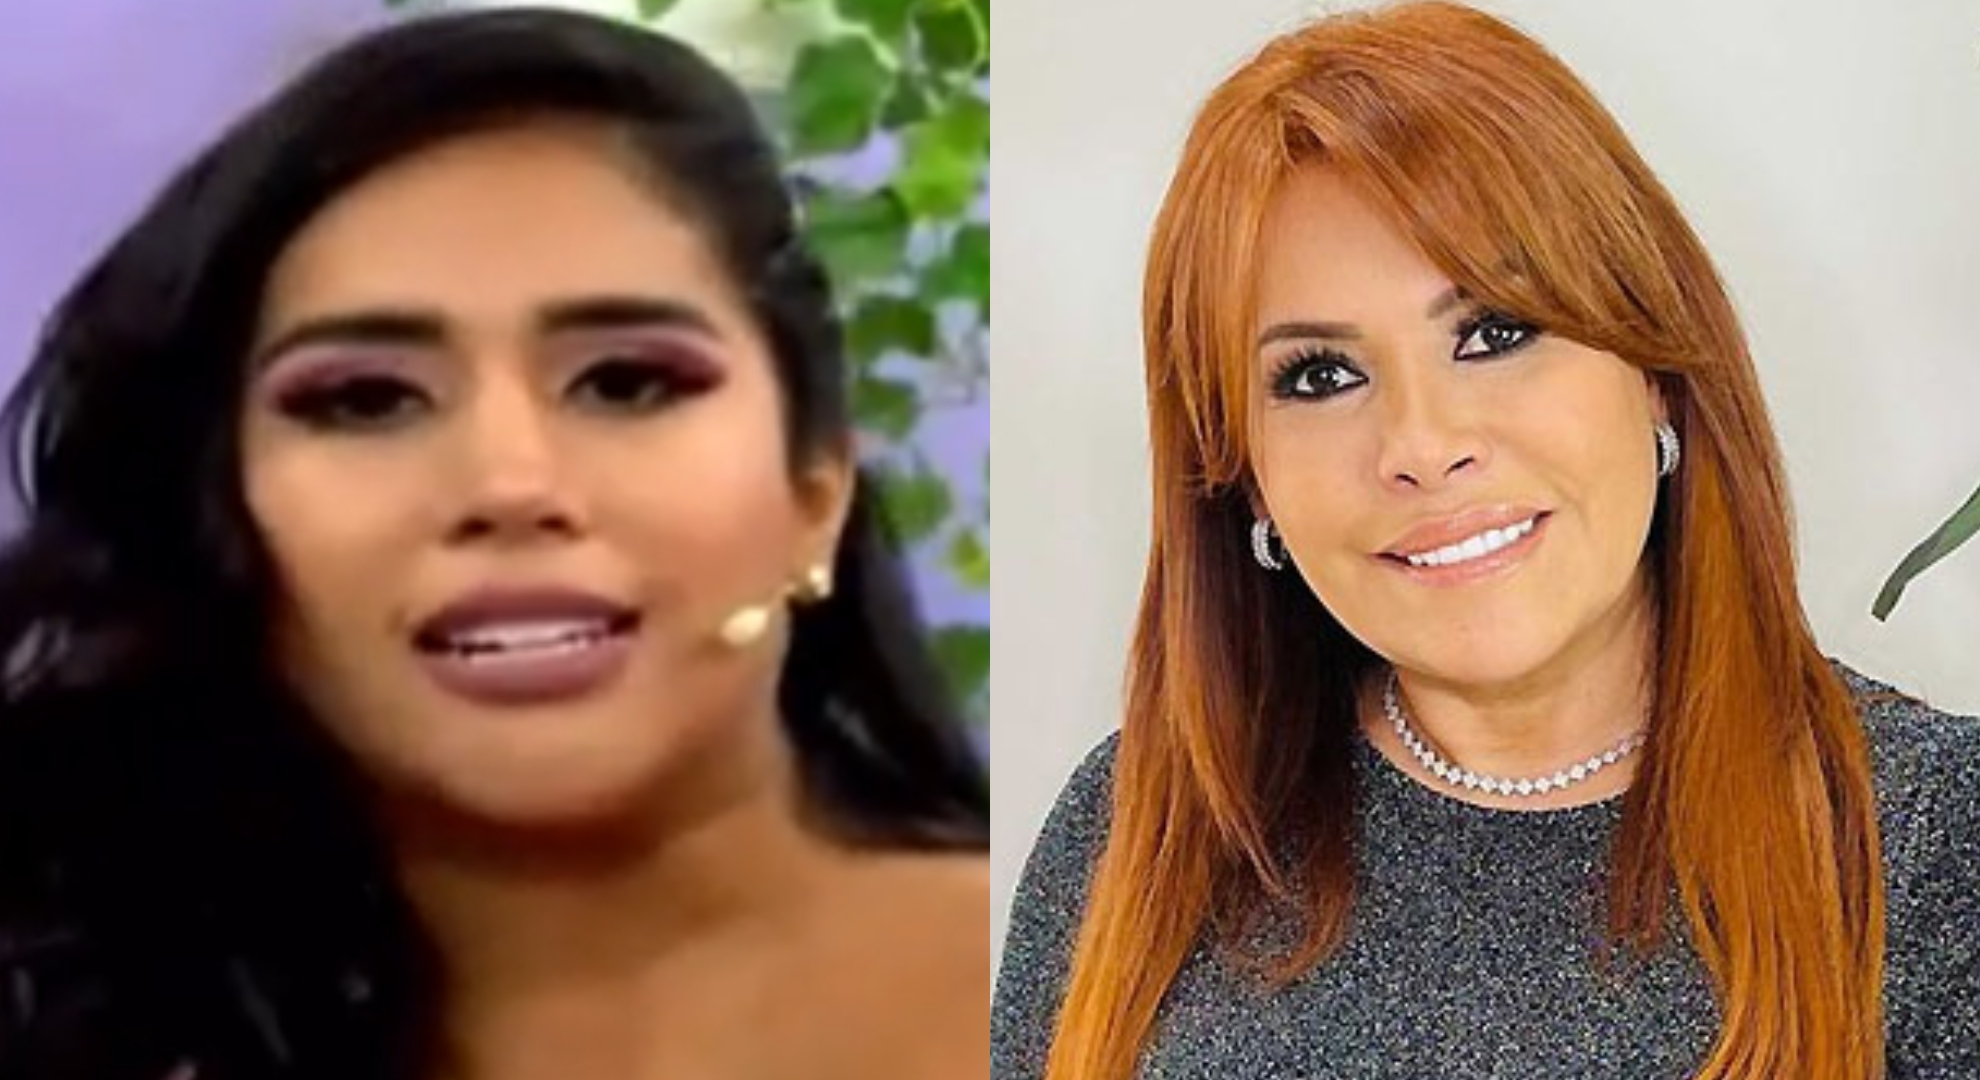 Melissa Paredes explodes against Magaly Medina.